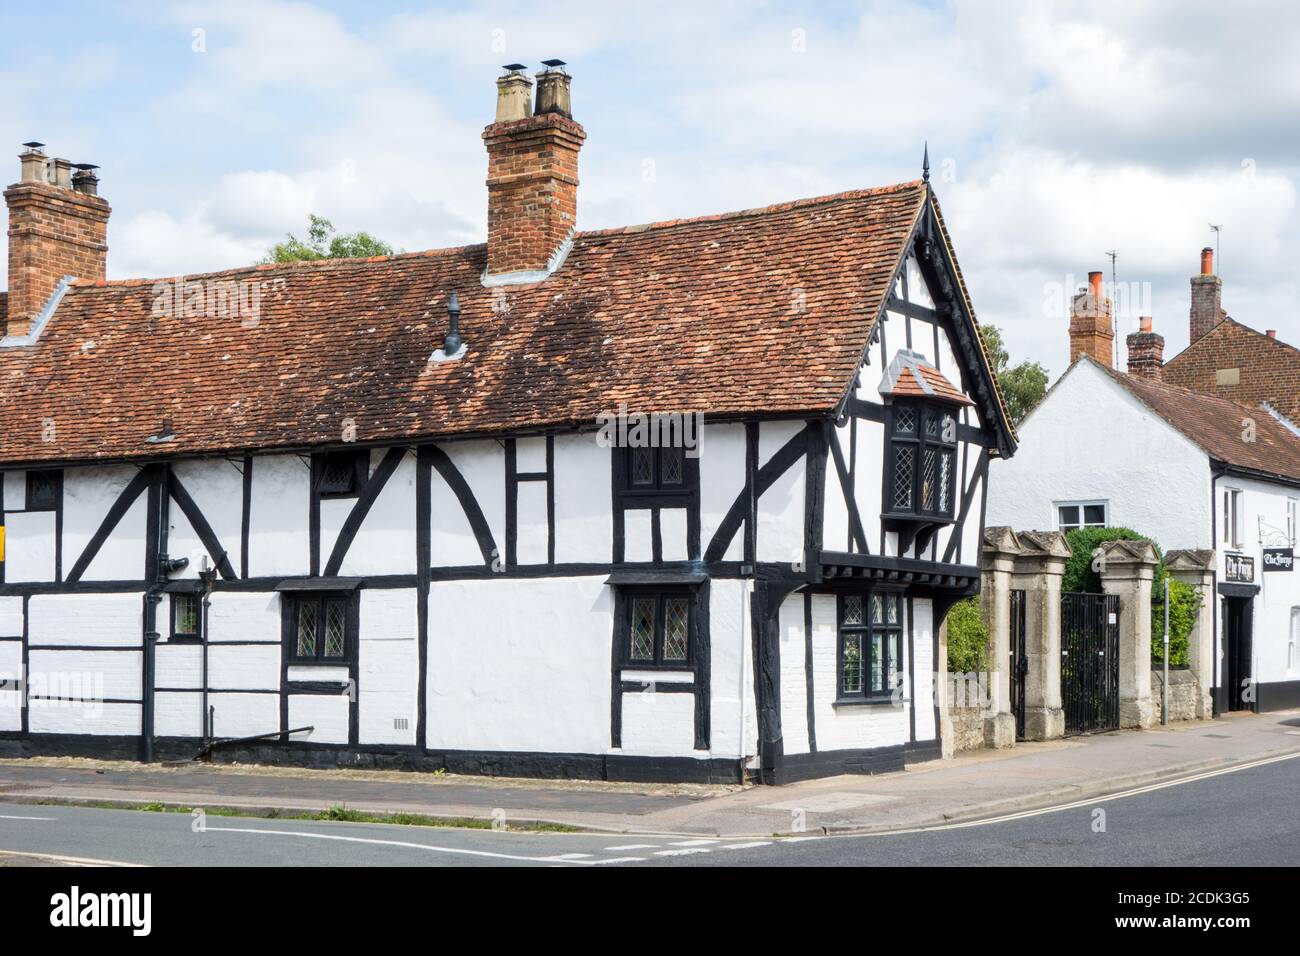 Black and white half timbered alms houses in the Oxfordshire market town of Thame Stock Photo